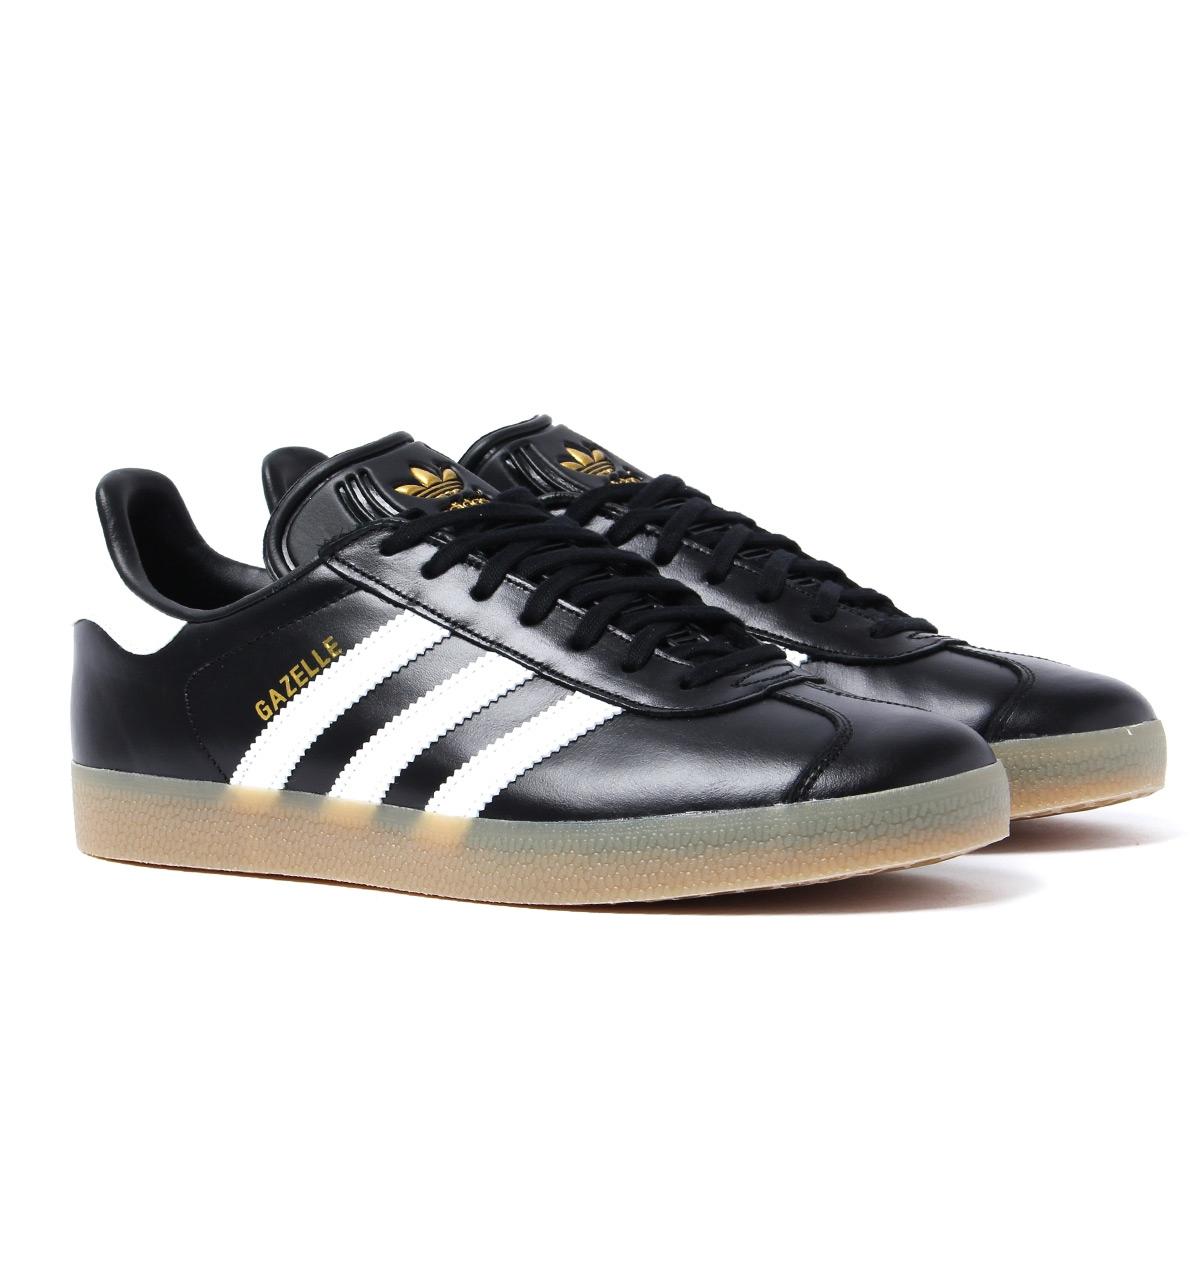 Brawl Candles Mold adidas Originals Leather Black & Gold Gazelle Trainers for Men | Lyst